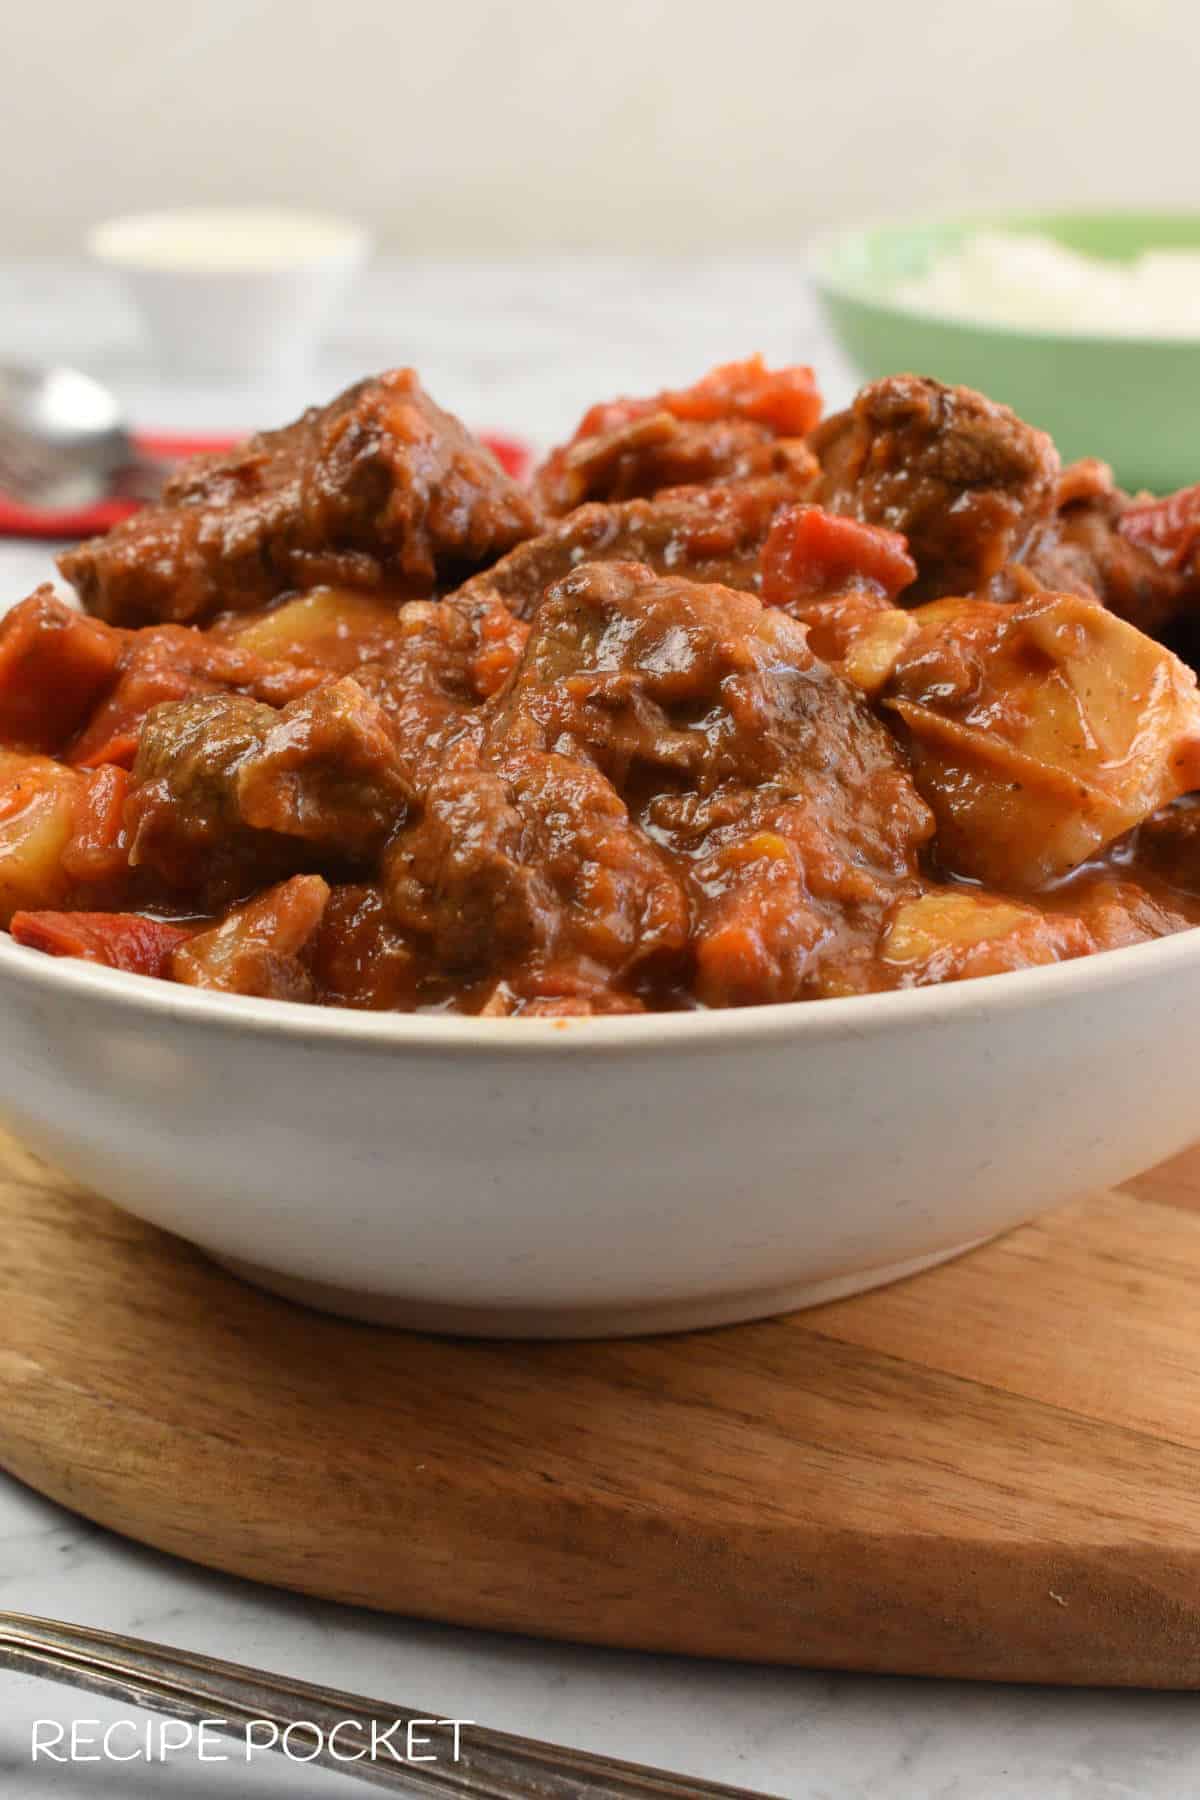 Slow cooker Hungarian goulash in a white bowl on a wooden board.